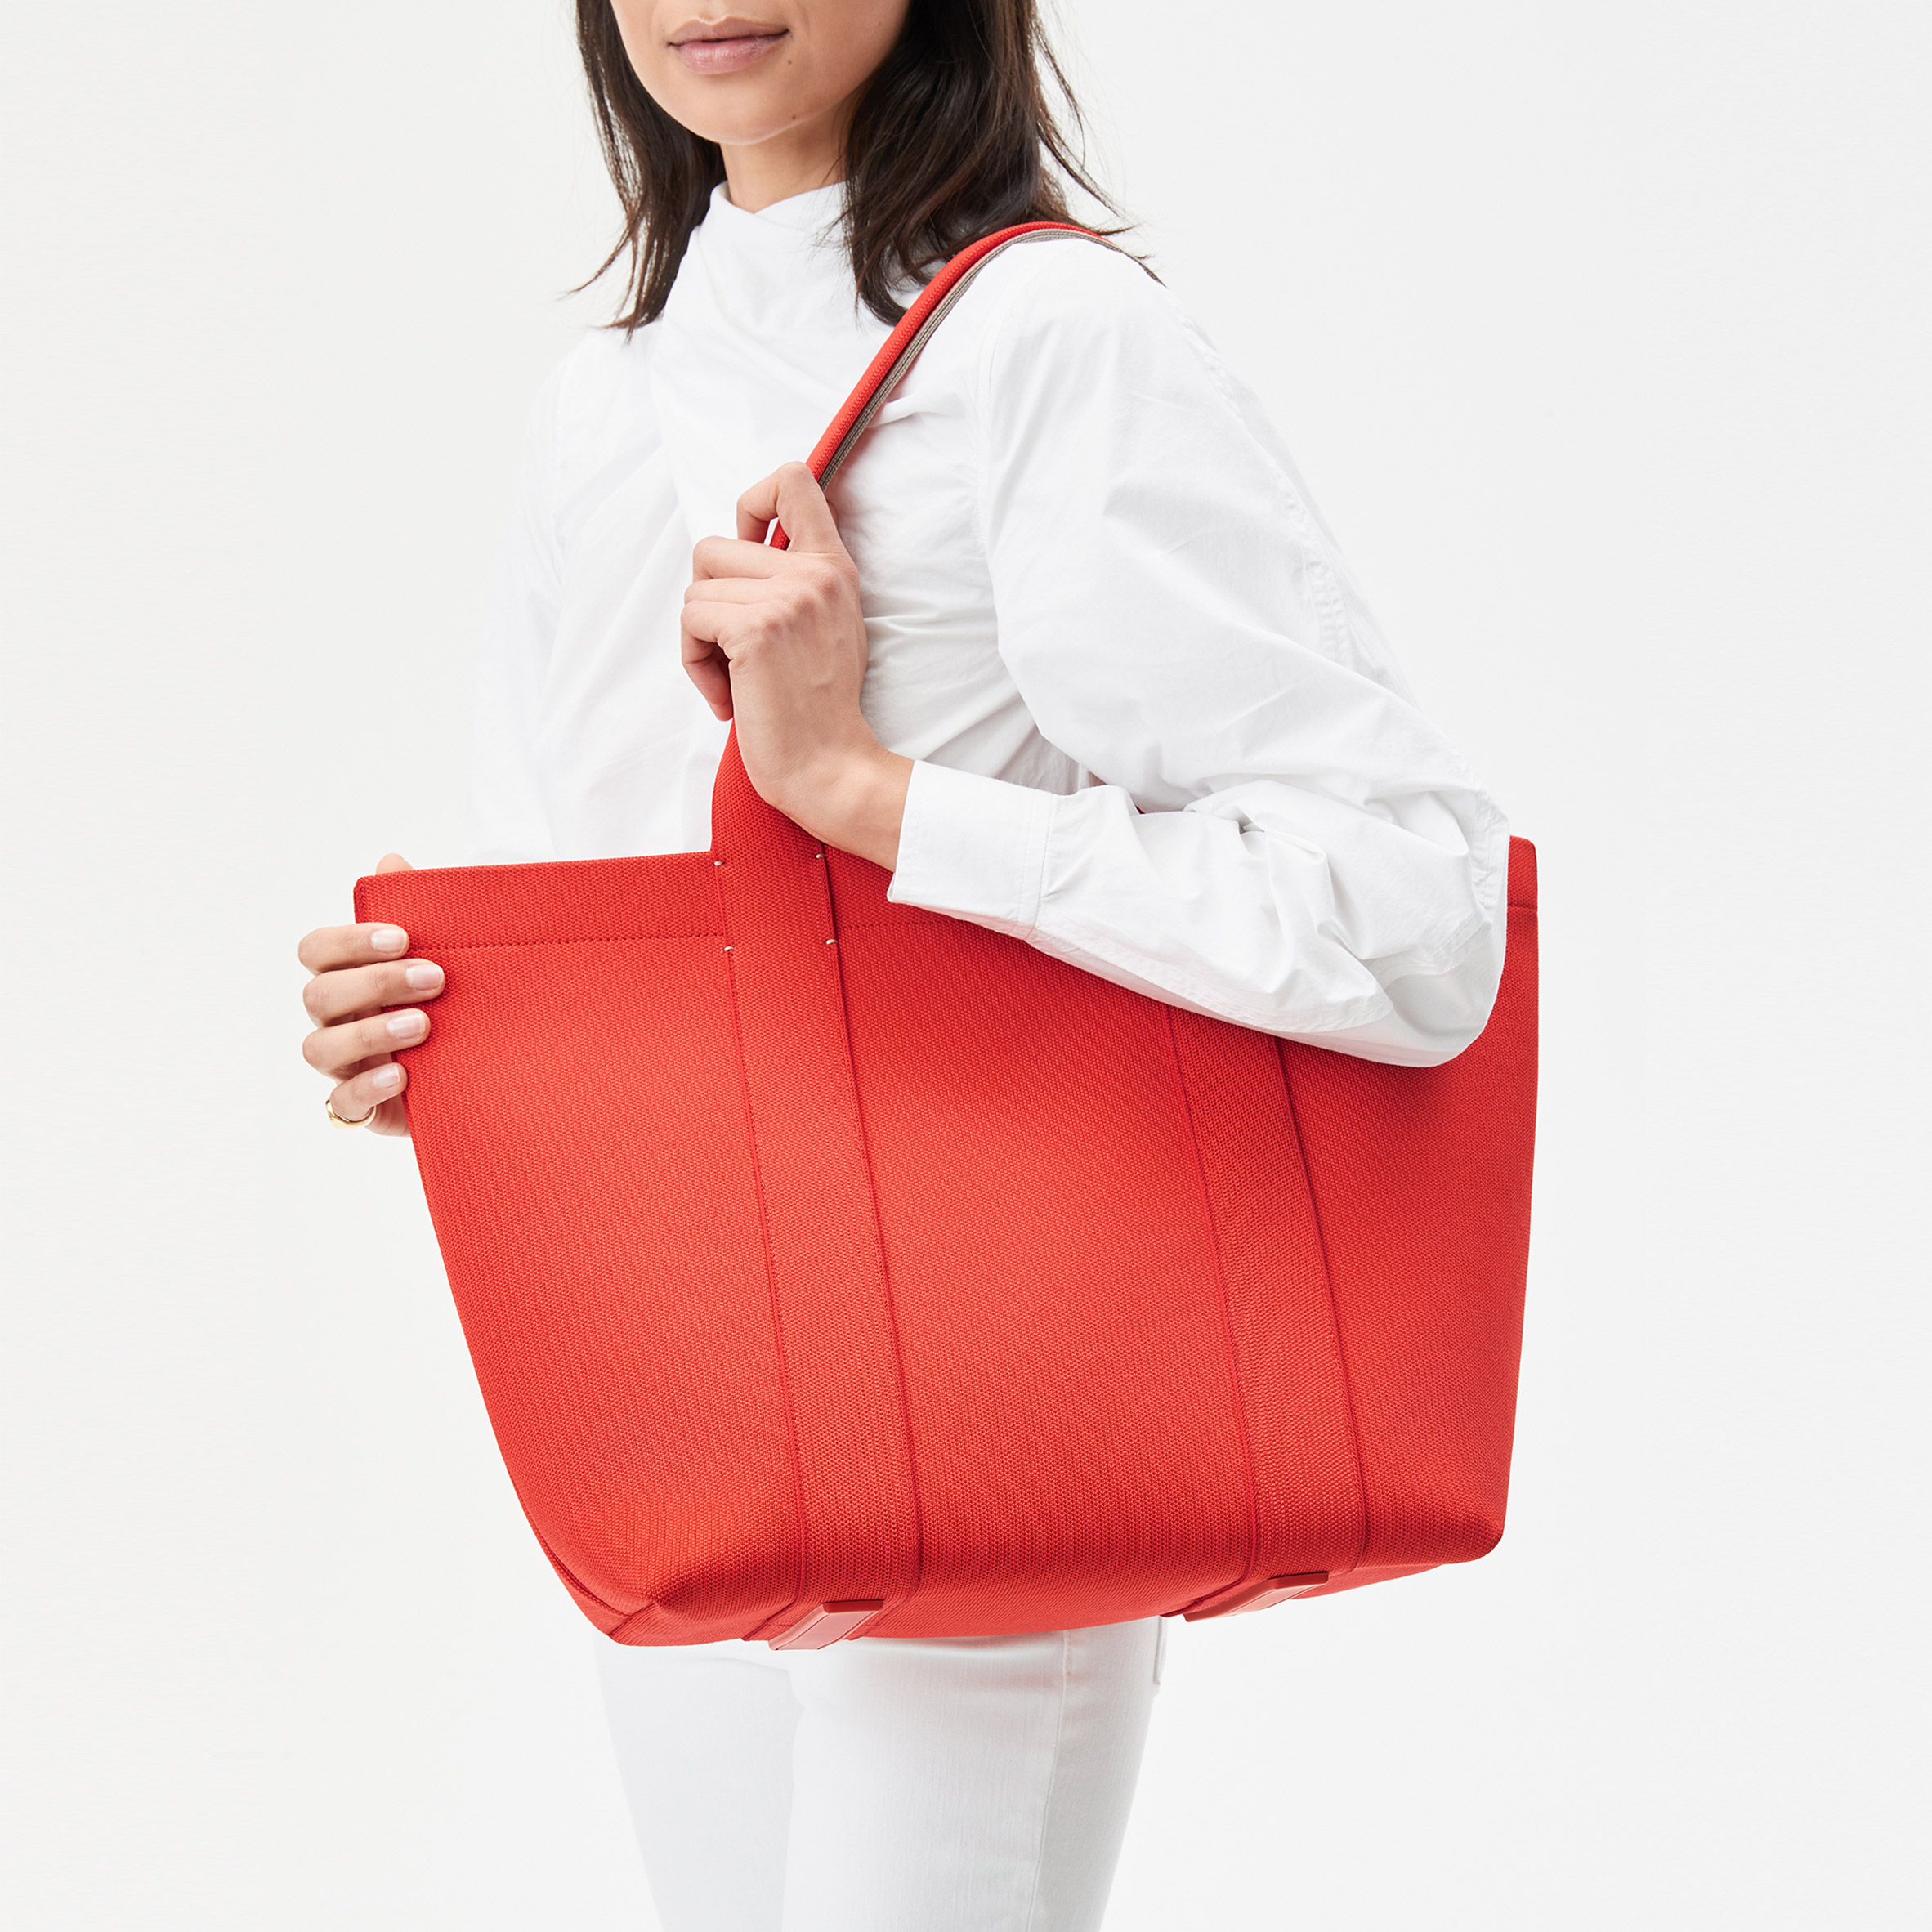 This New Fully Recycled Vegan Leather Handbag Is Made From 11 Plastic  Bottles | VegNews